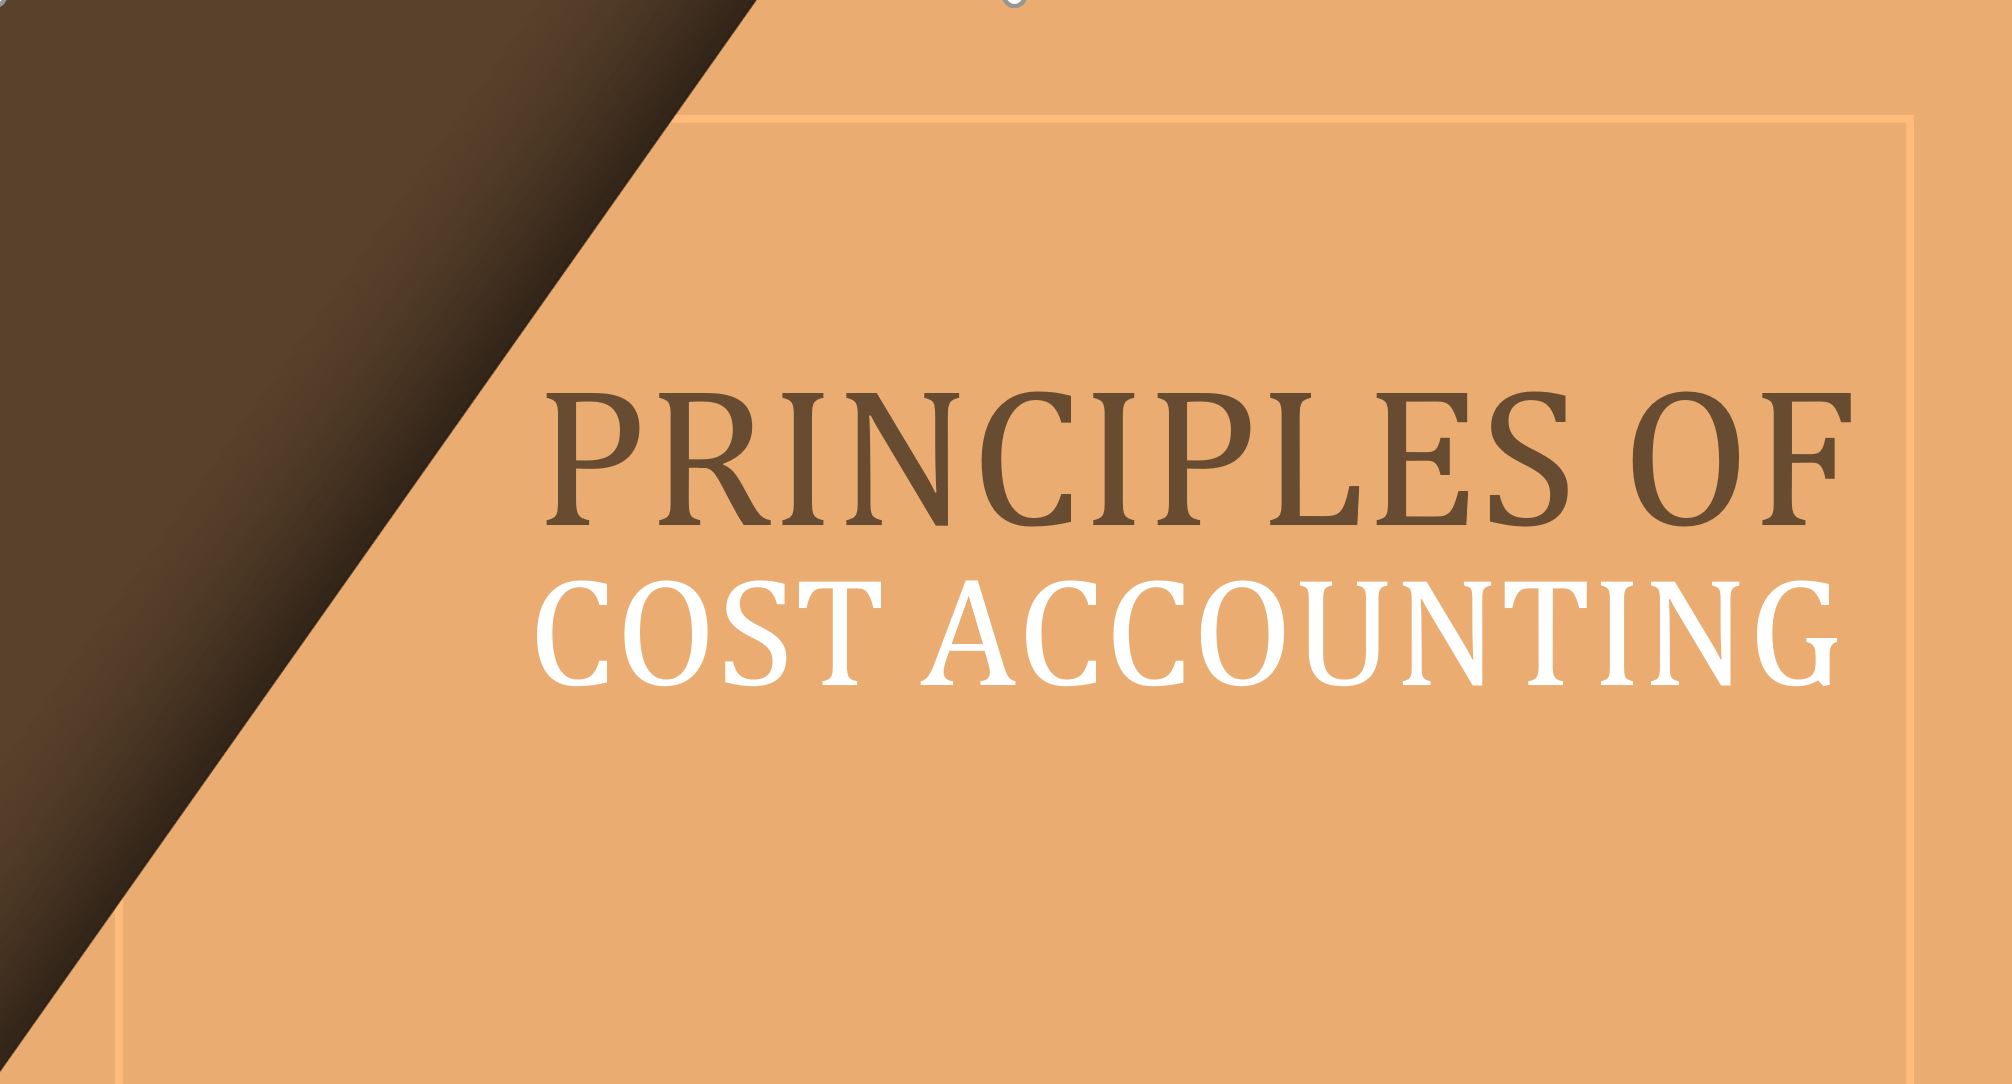 T6: Cost Accounting and procurement